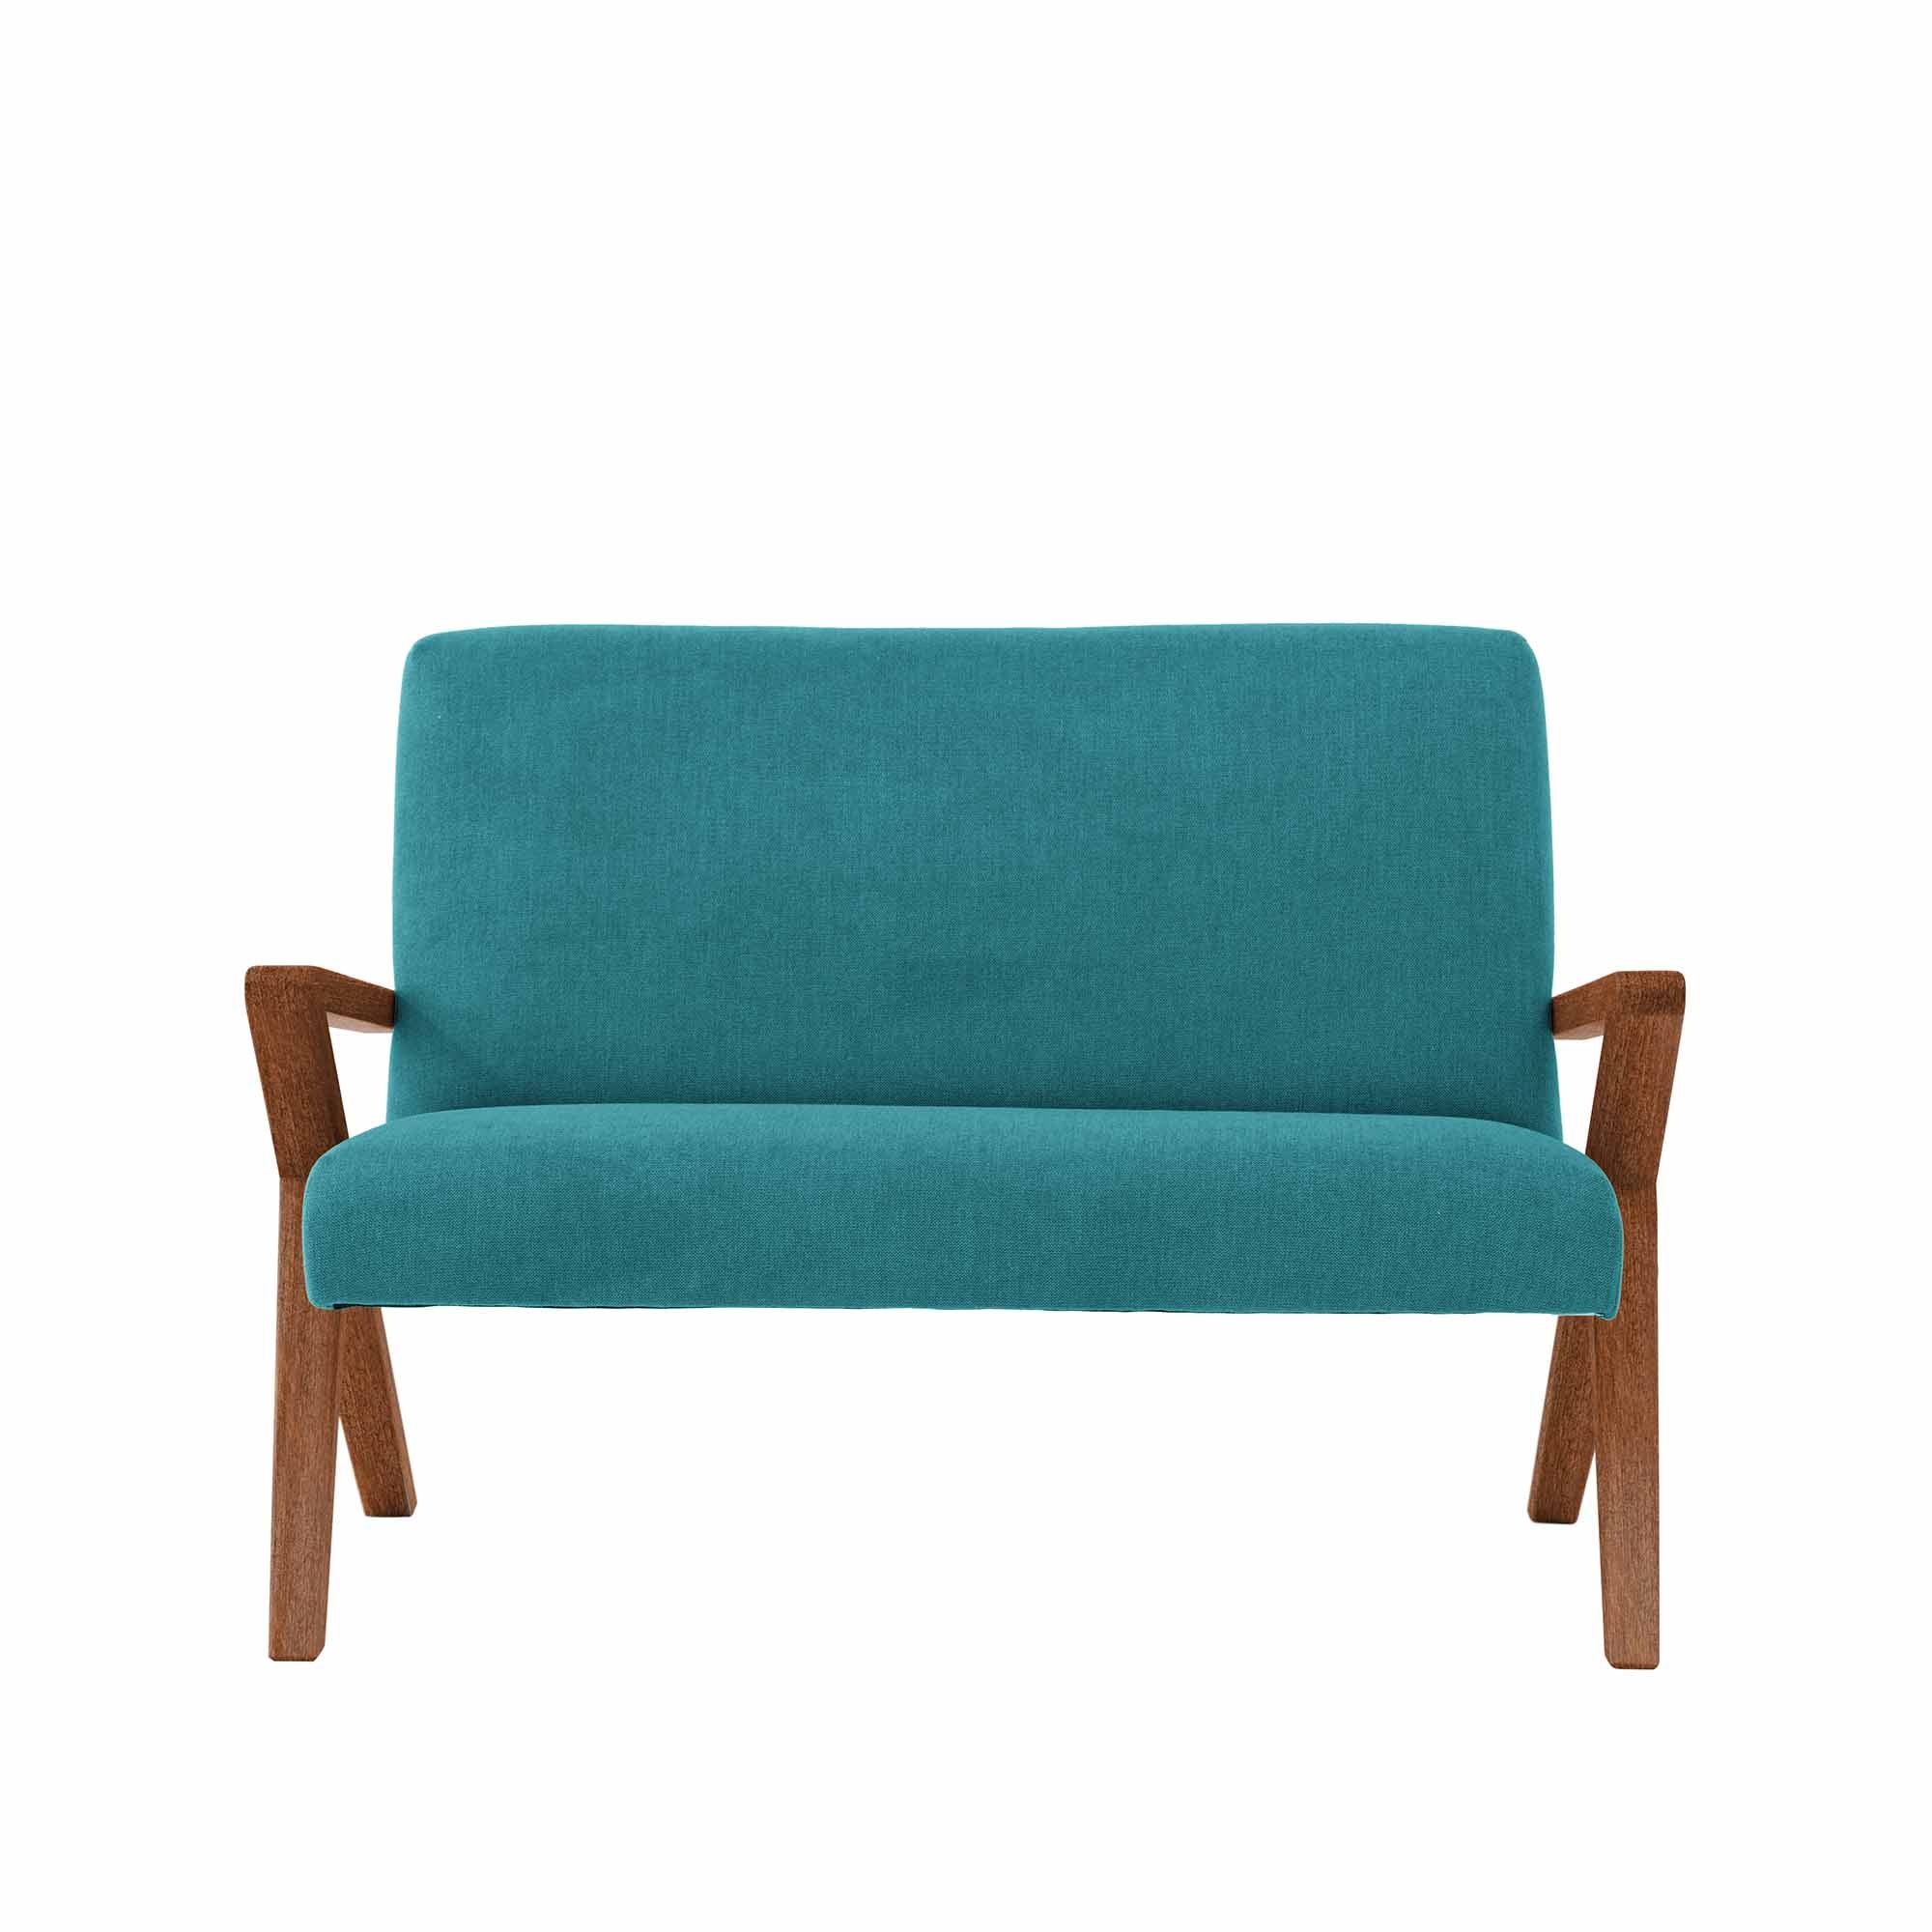  2 Seater Sofa, Beech Wood Frame, Walnut Colour blue fabrick, front view